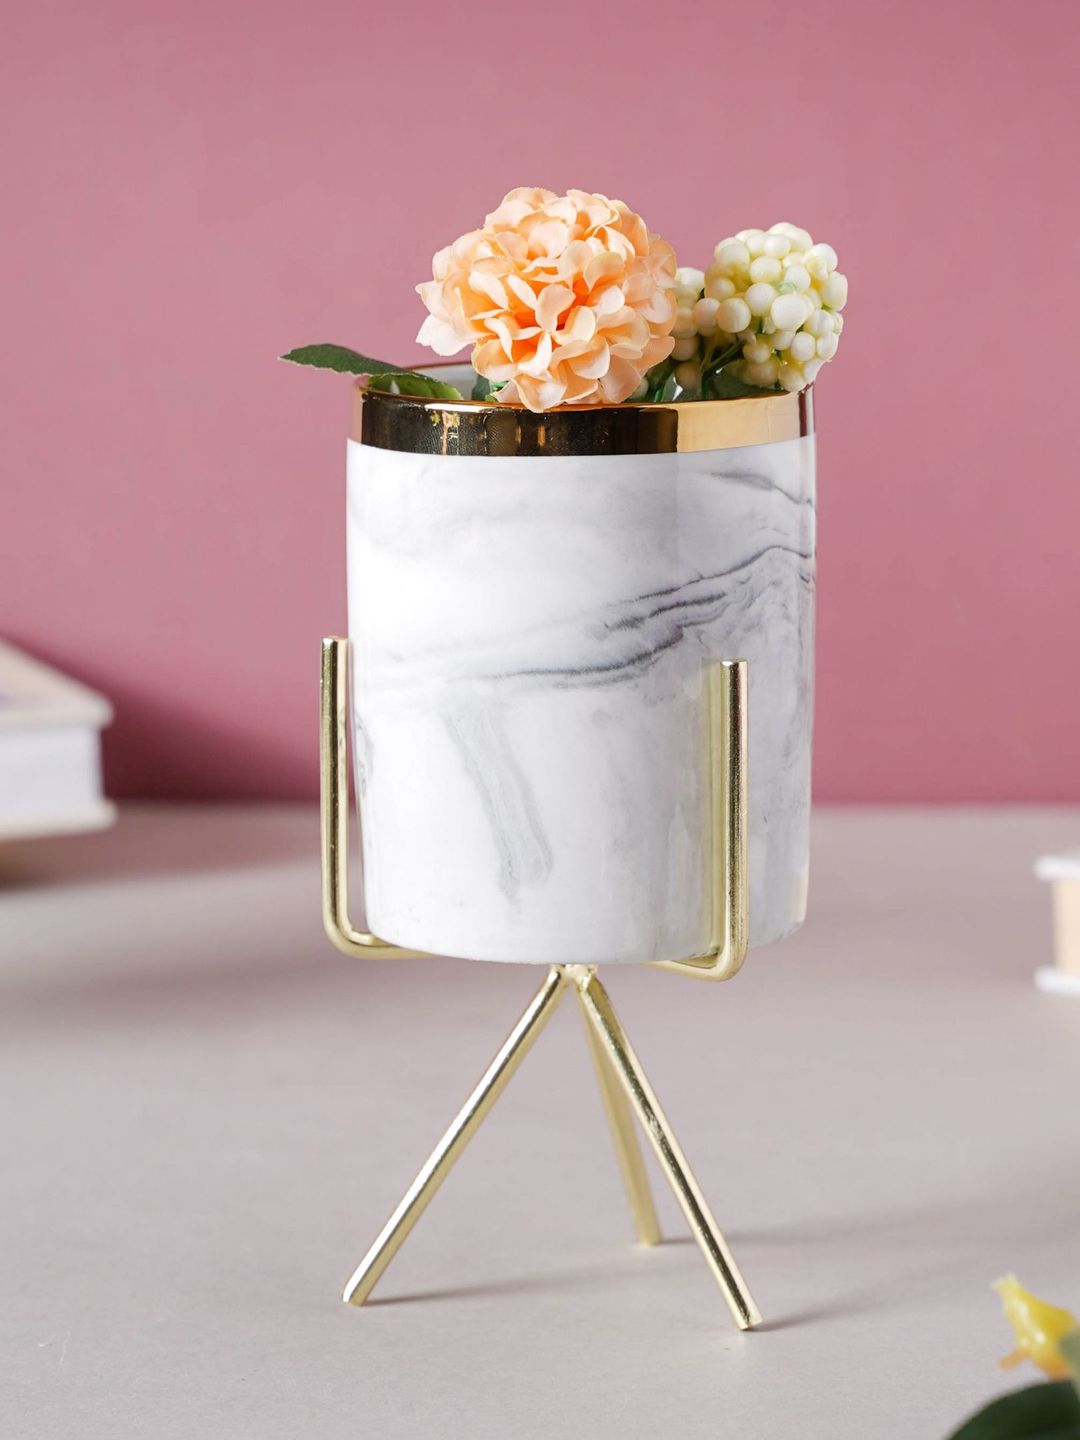 Nestasia White & Gold-Toned Marble Printed Ceramic Planter With Stand Price in India